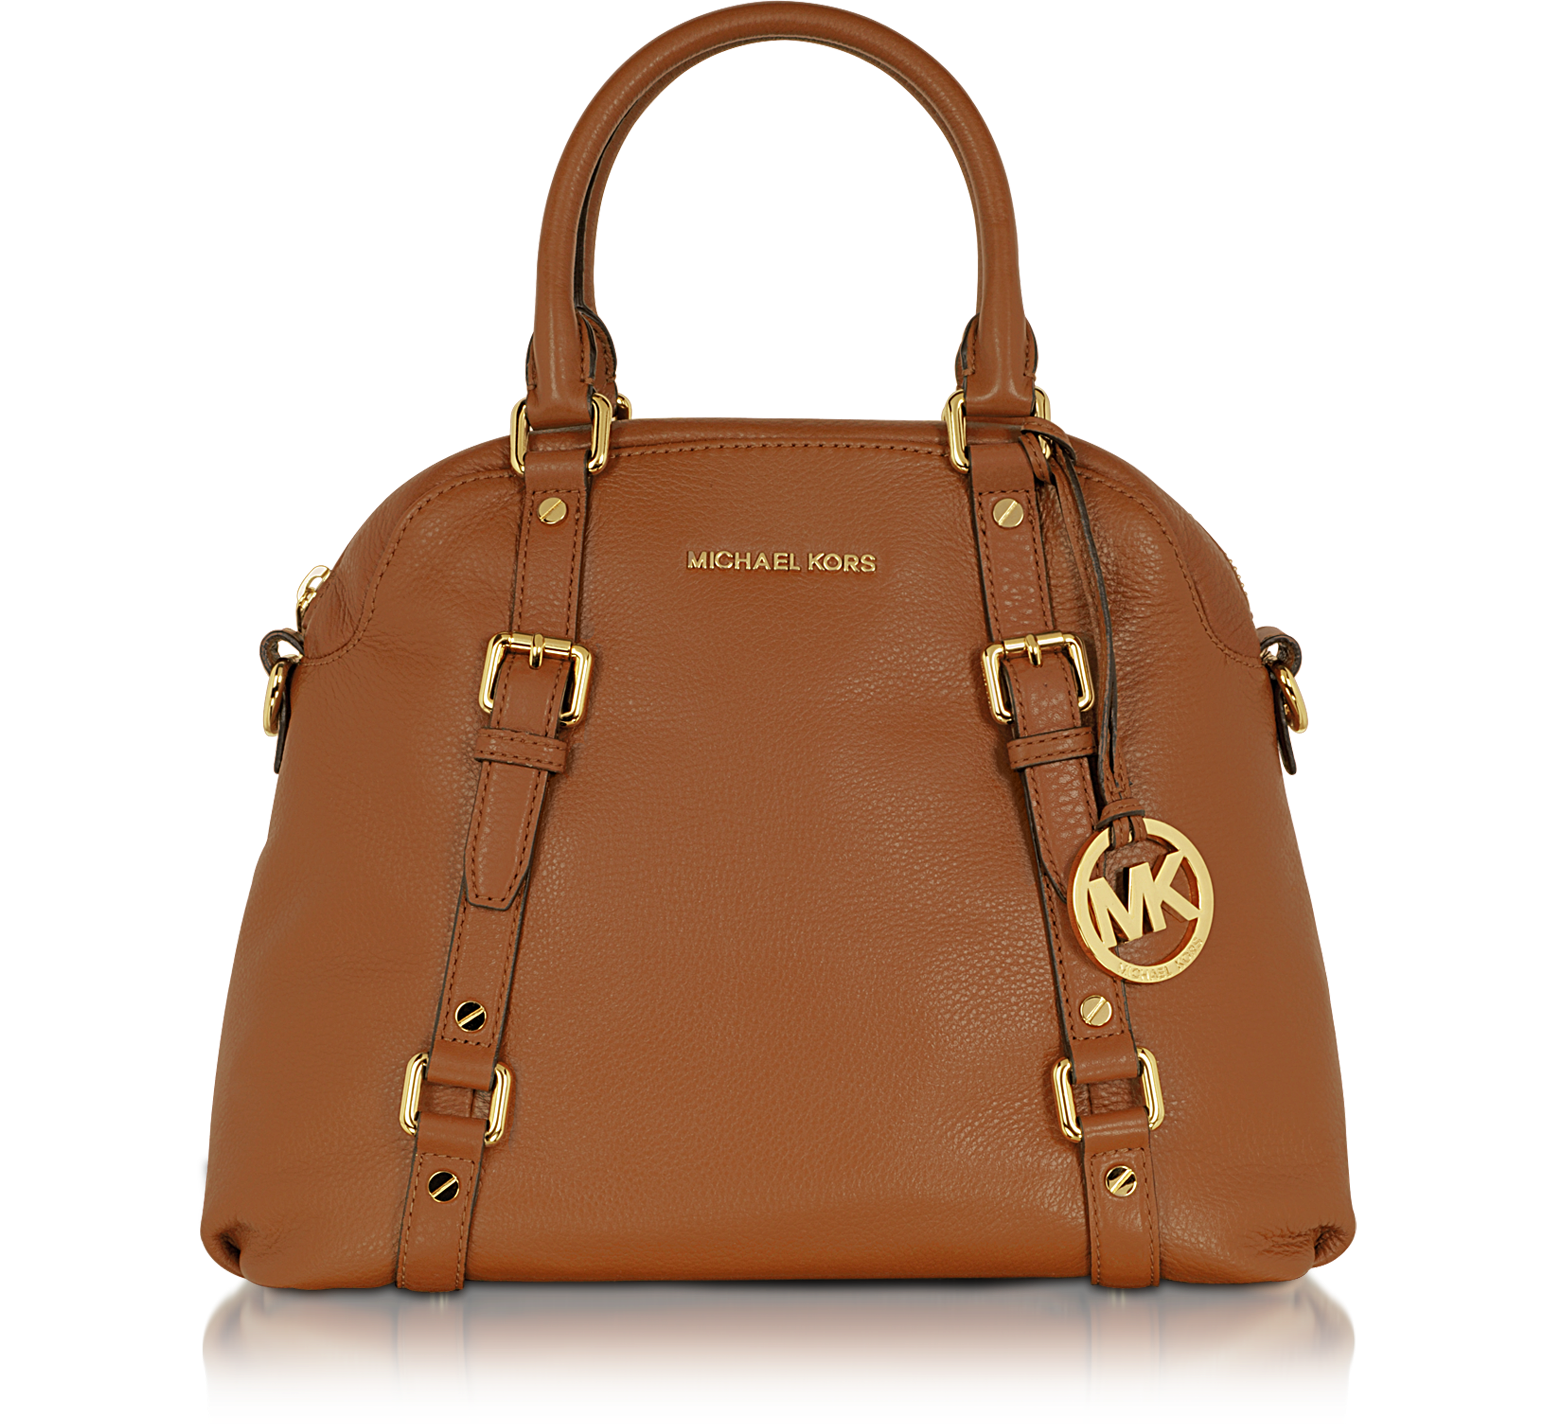 Michael Kors Brown Bedford Genuine Leather Bowling Satchel Bag at FORZIERI